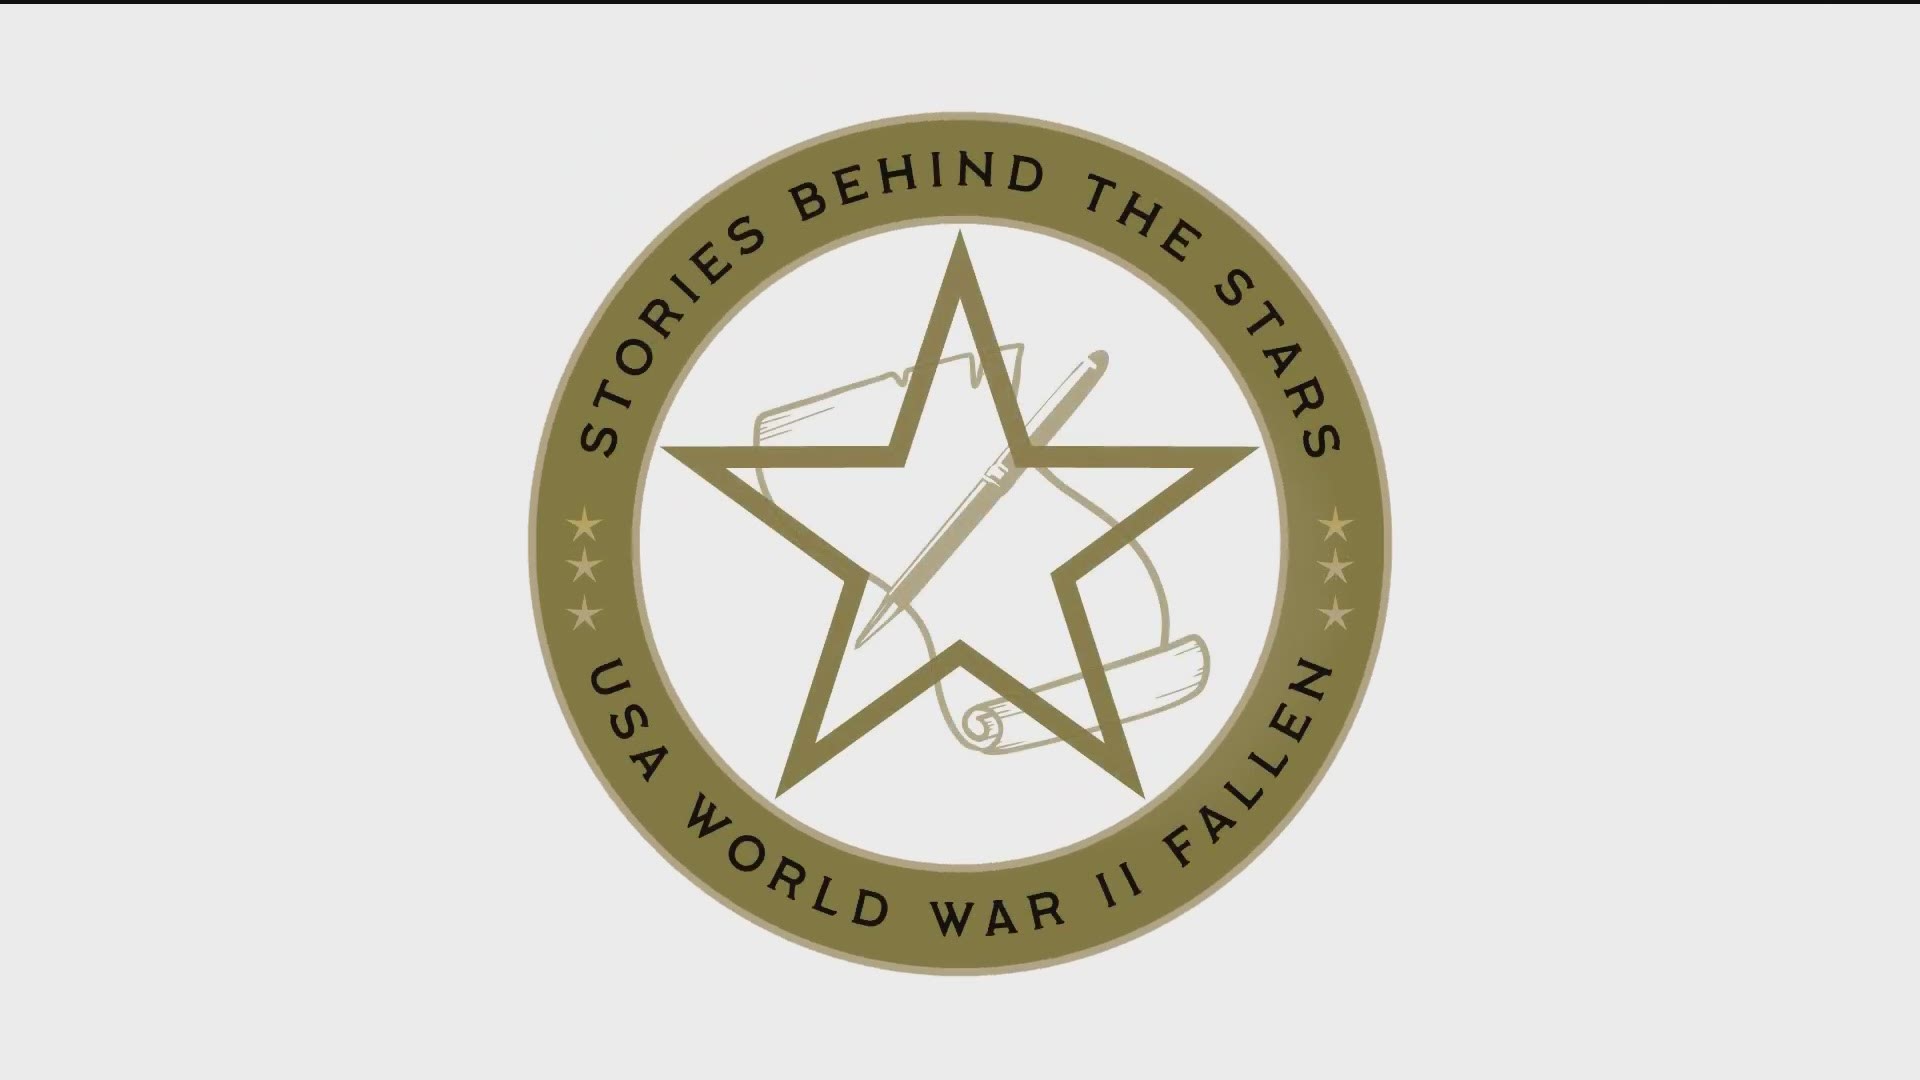 Stories Behind the Stars looking for volunteers to write stories of WWII